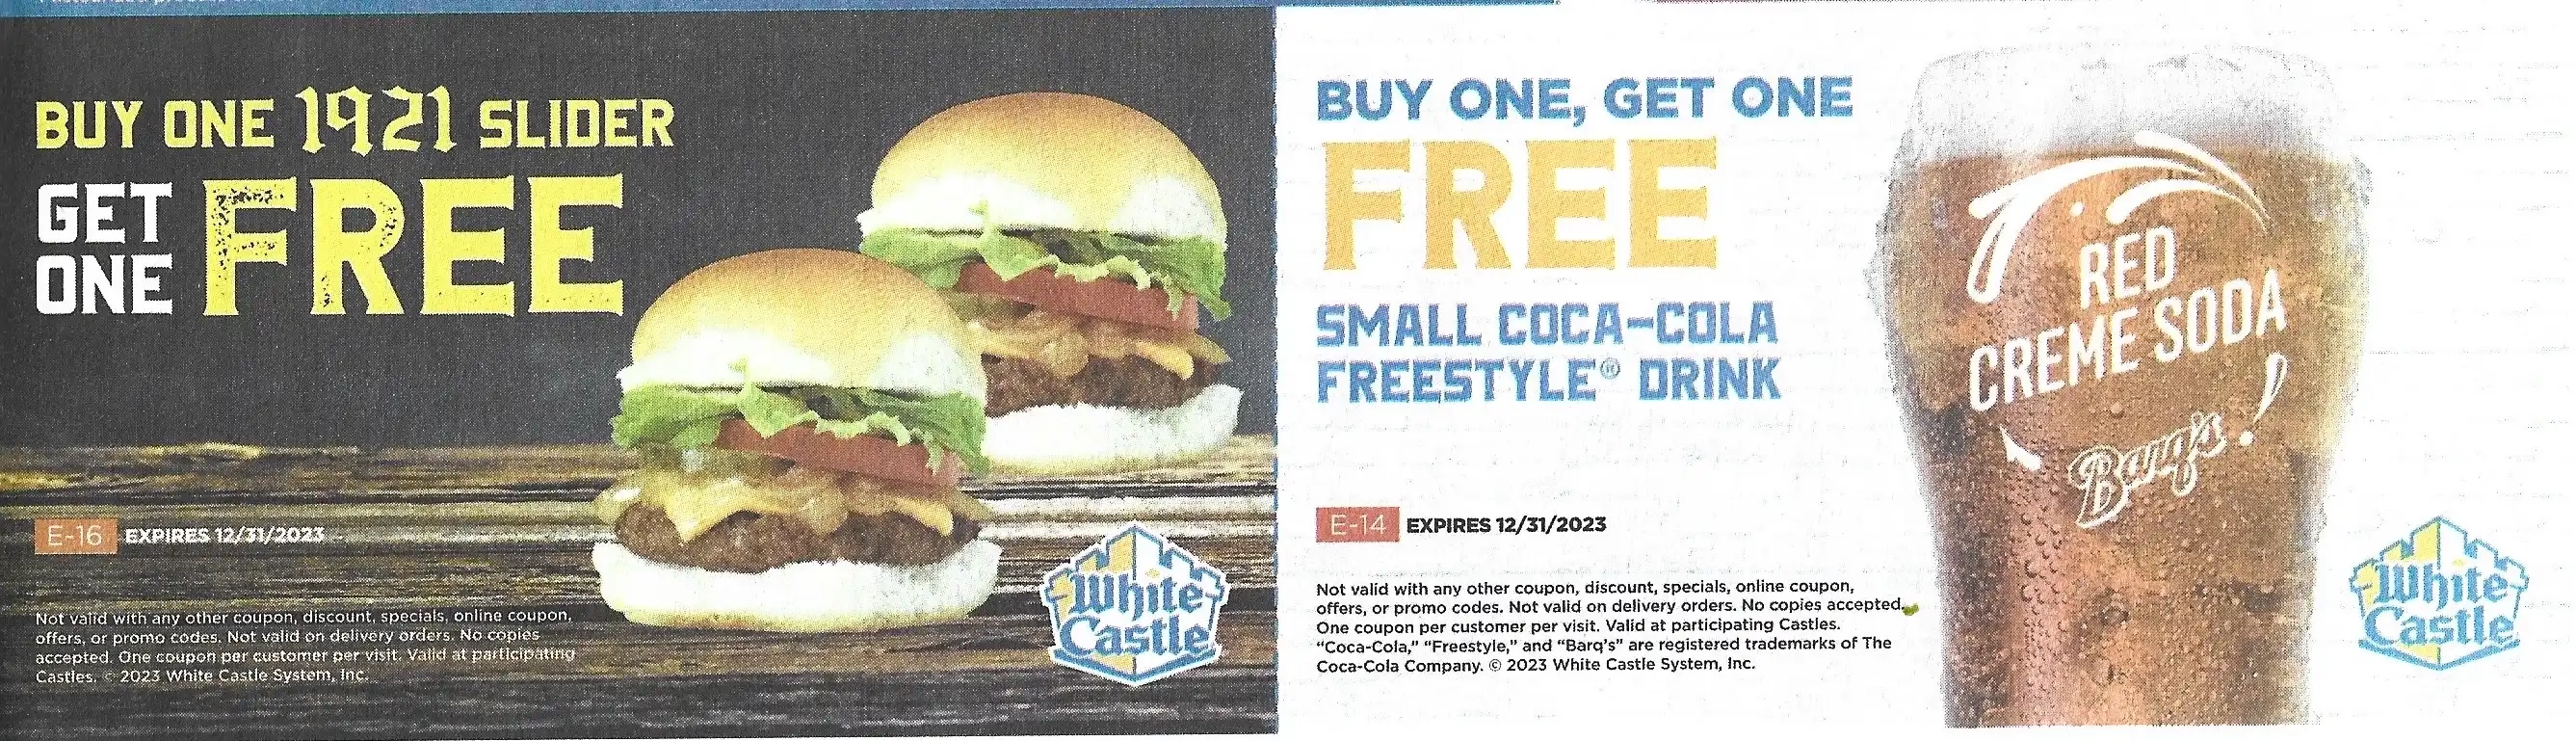 White Castle Mailer Coupons - Expires 12/31/2023 2